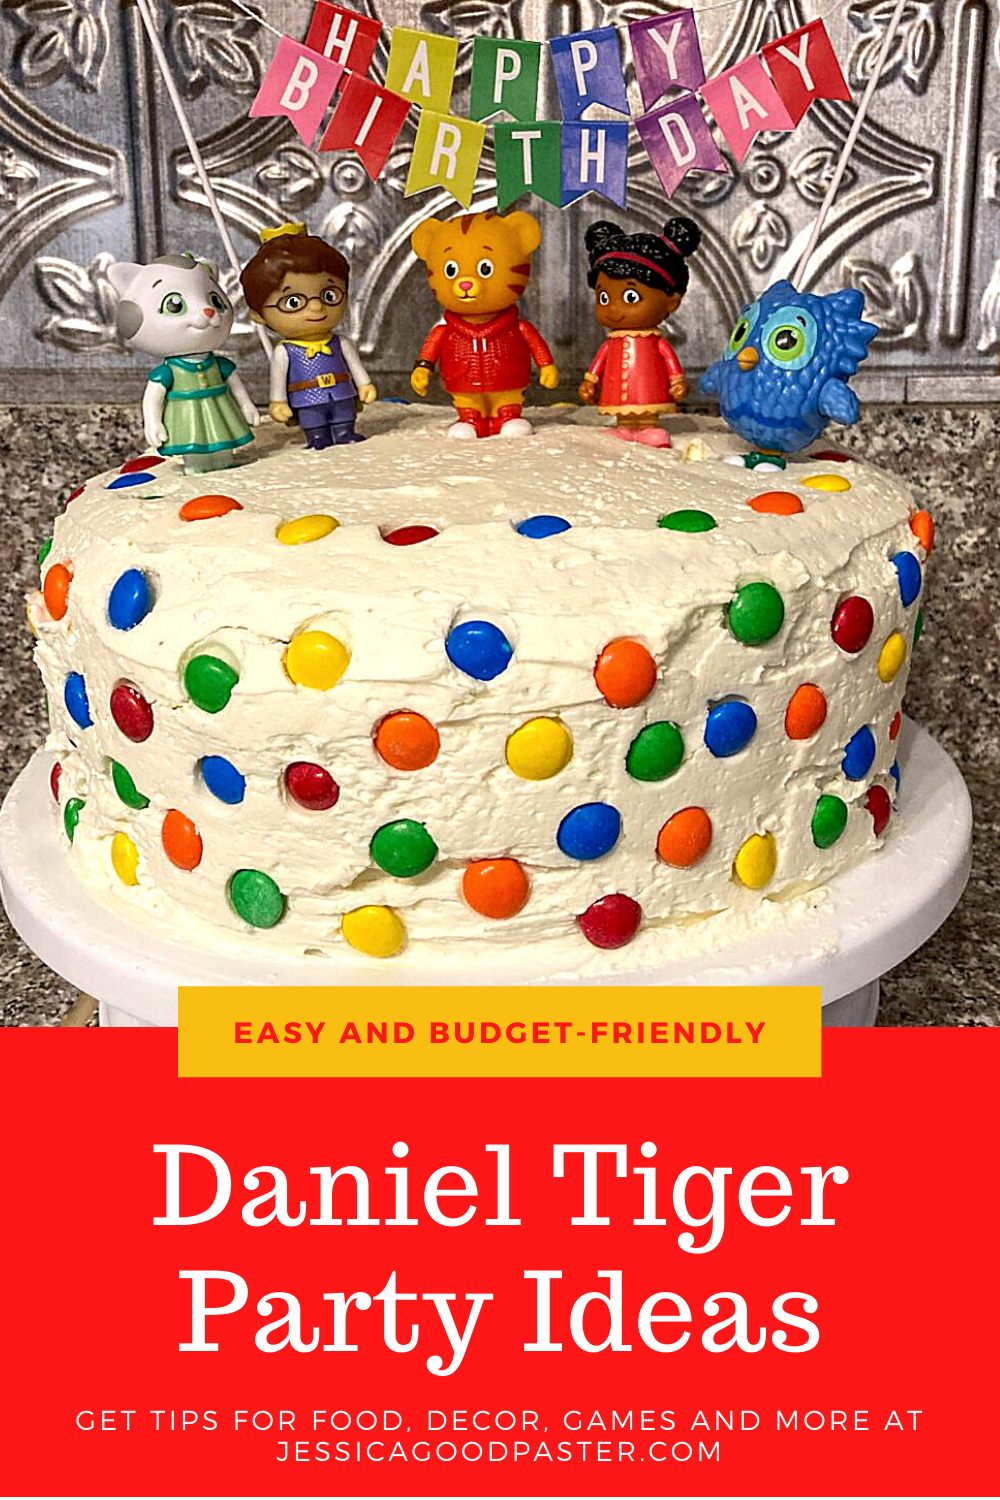 Find ideas to host a great Daniel Tiger Neighborhood birthday party! Includes tips for food, decorations, games, party supplies, outfits, invitations, gifts, and more. Plus, get a free printable scavenger hunt game. This theme is fun, easy, and budget friendly! #danieltiger #danieltigerparty #birthdayparty #danieltigercake #danieltigerfood #danieltigergames #danieltigerdecorations